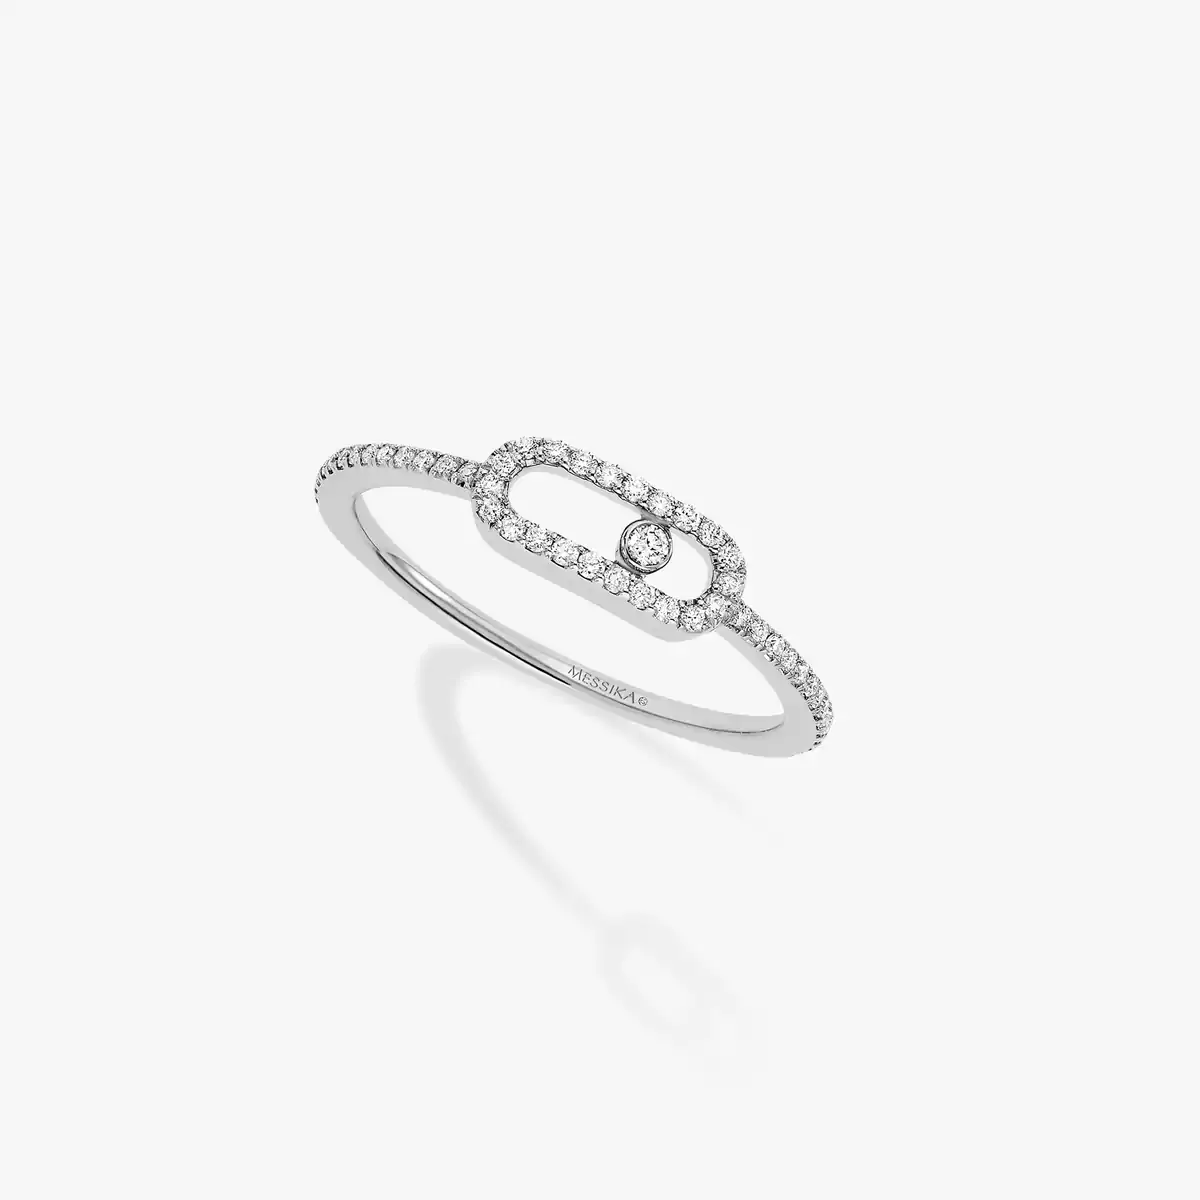 Move Uno Pavé White Gold For Her Diamond Ring 05630-WG